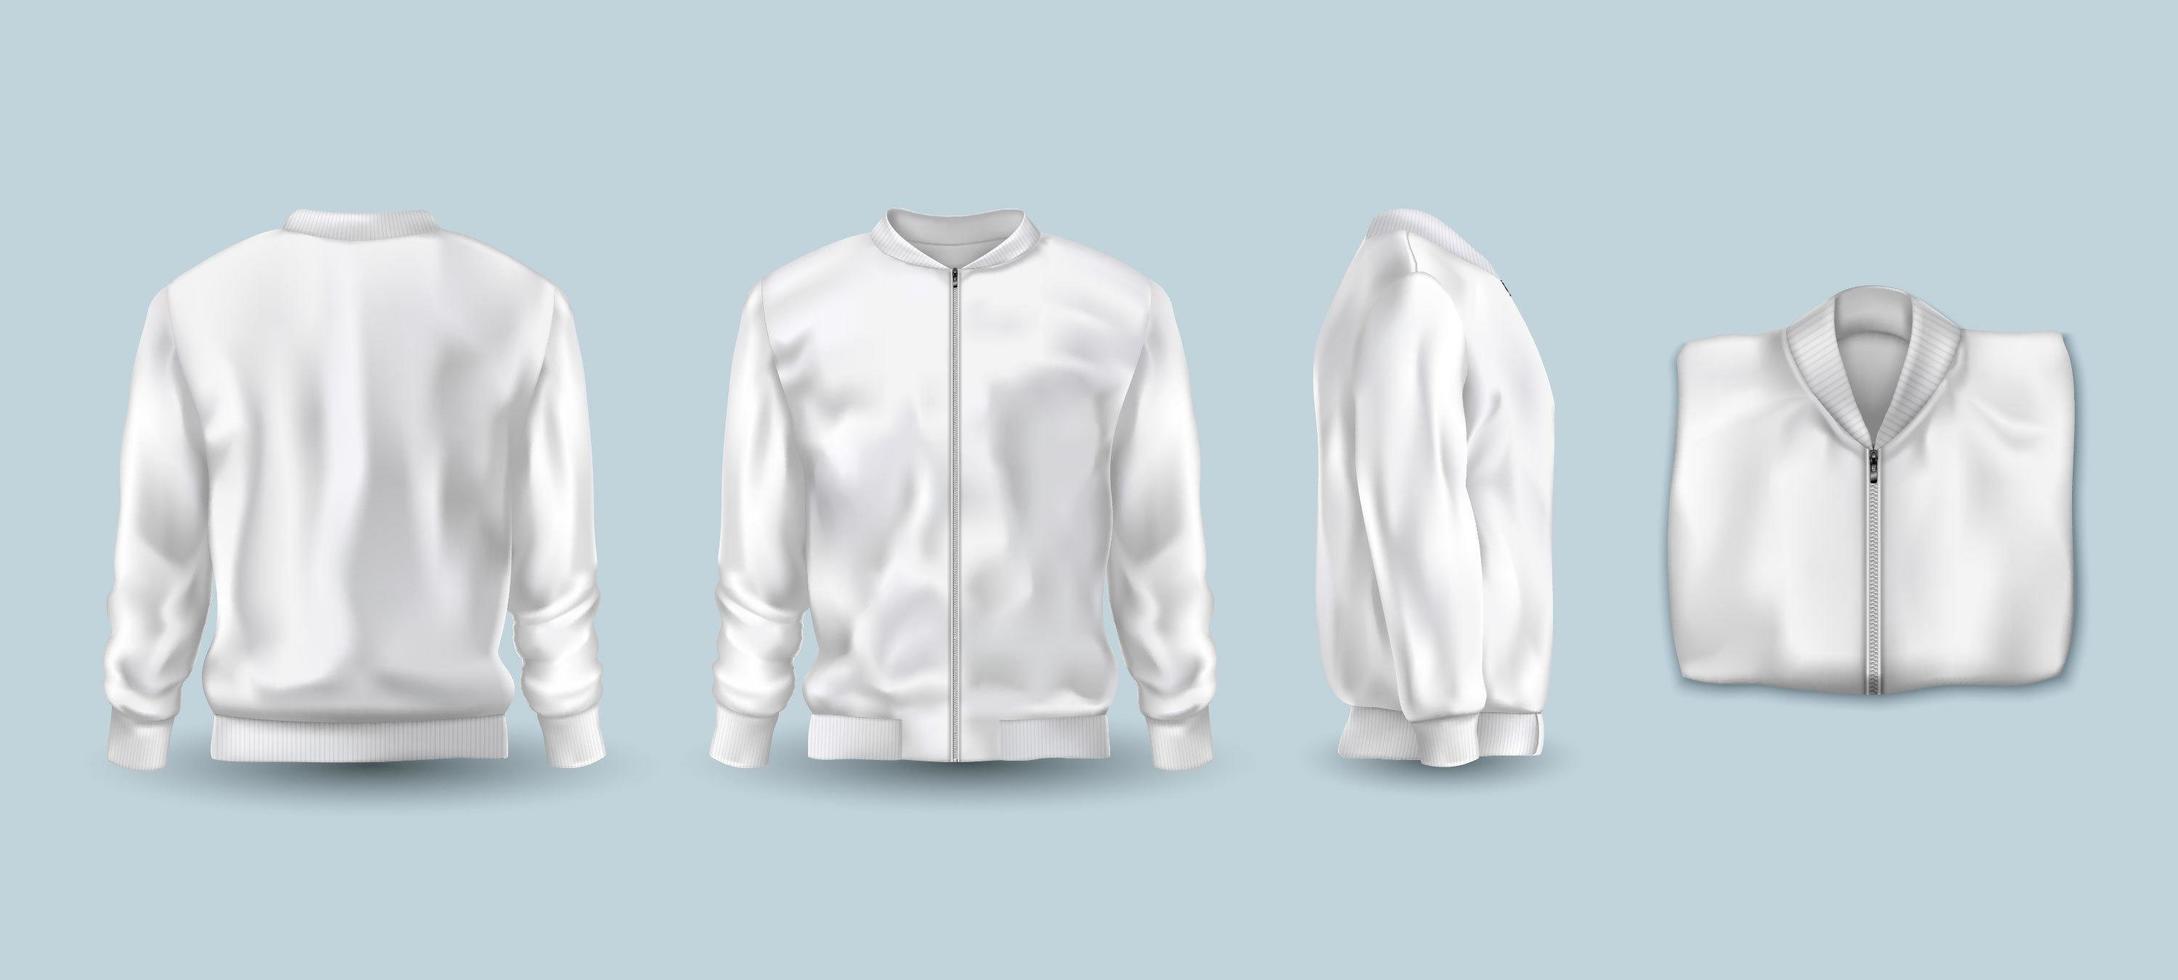 Blank Bomber Jacket in White Color Template Set vector